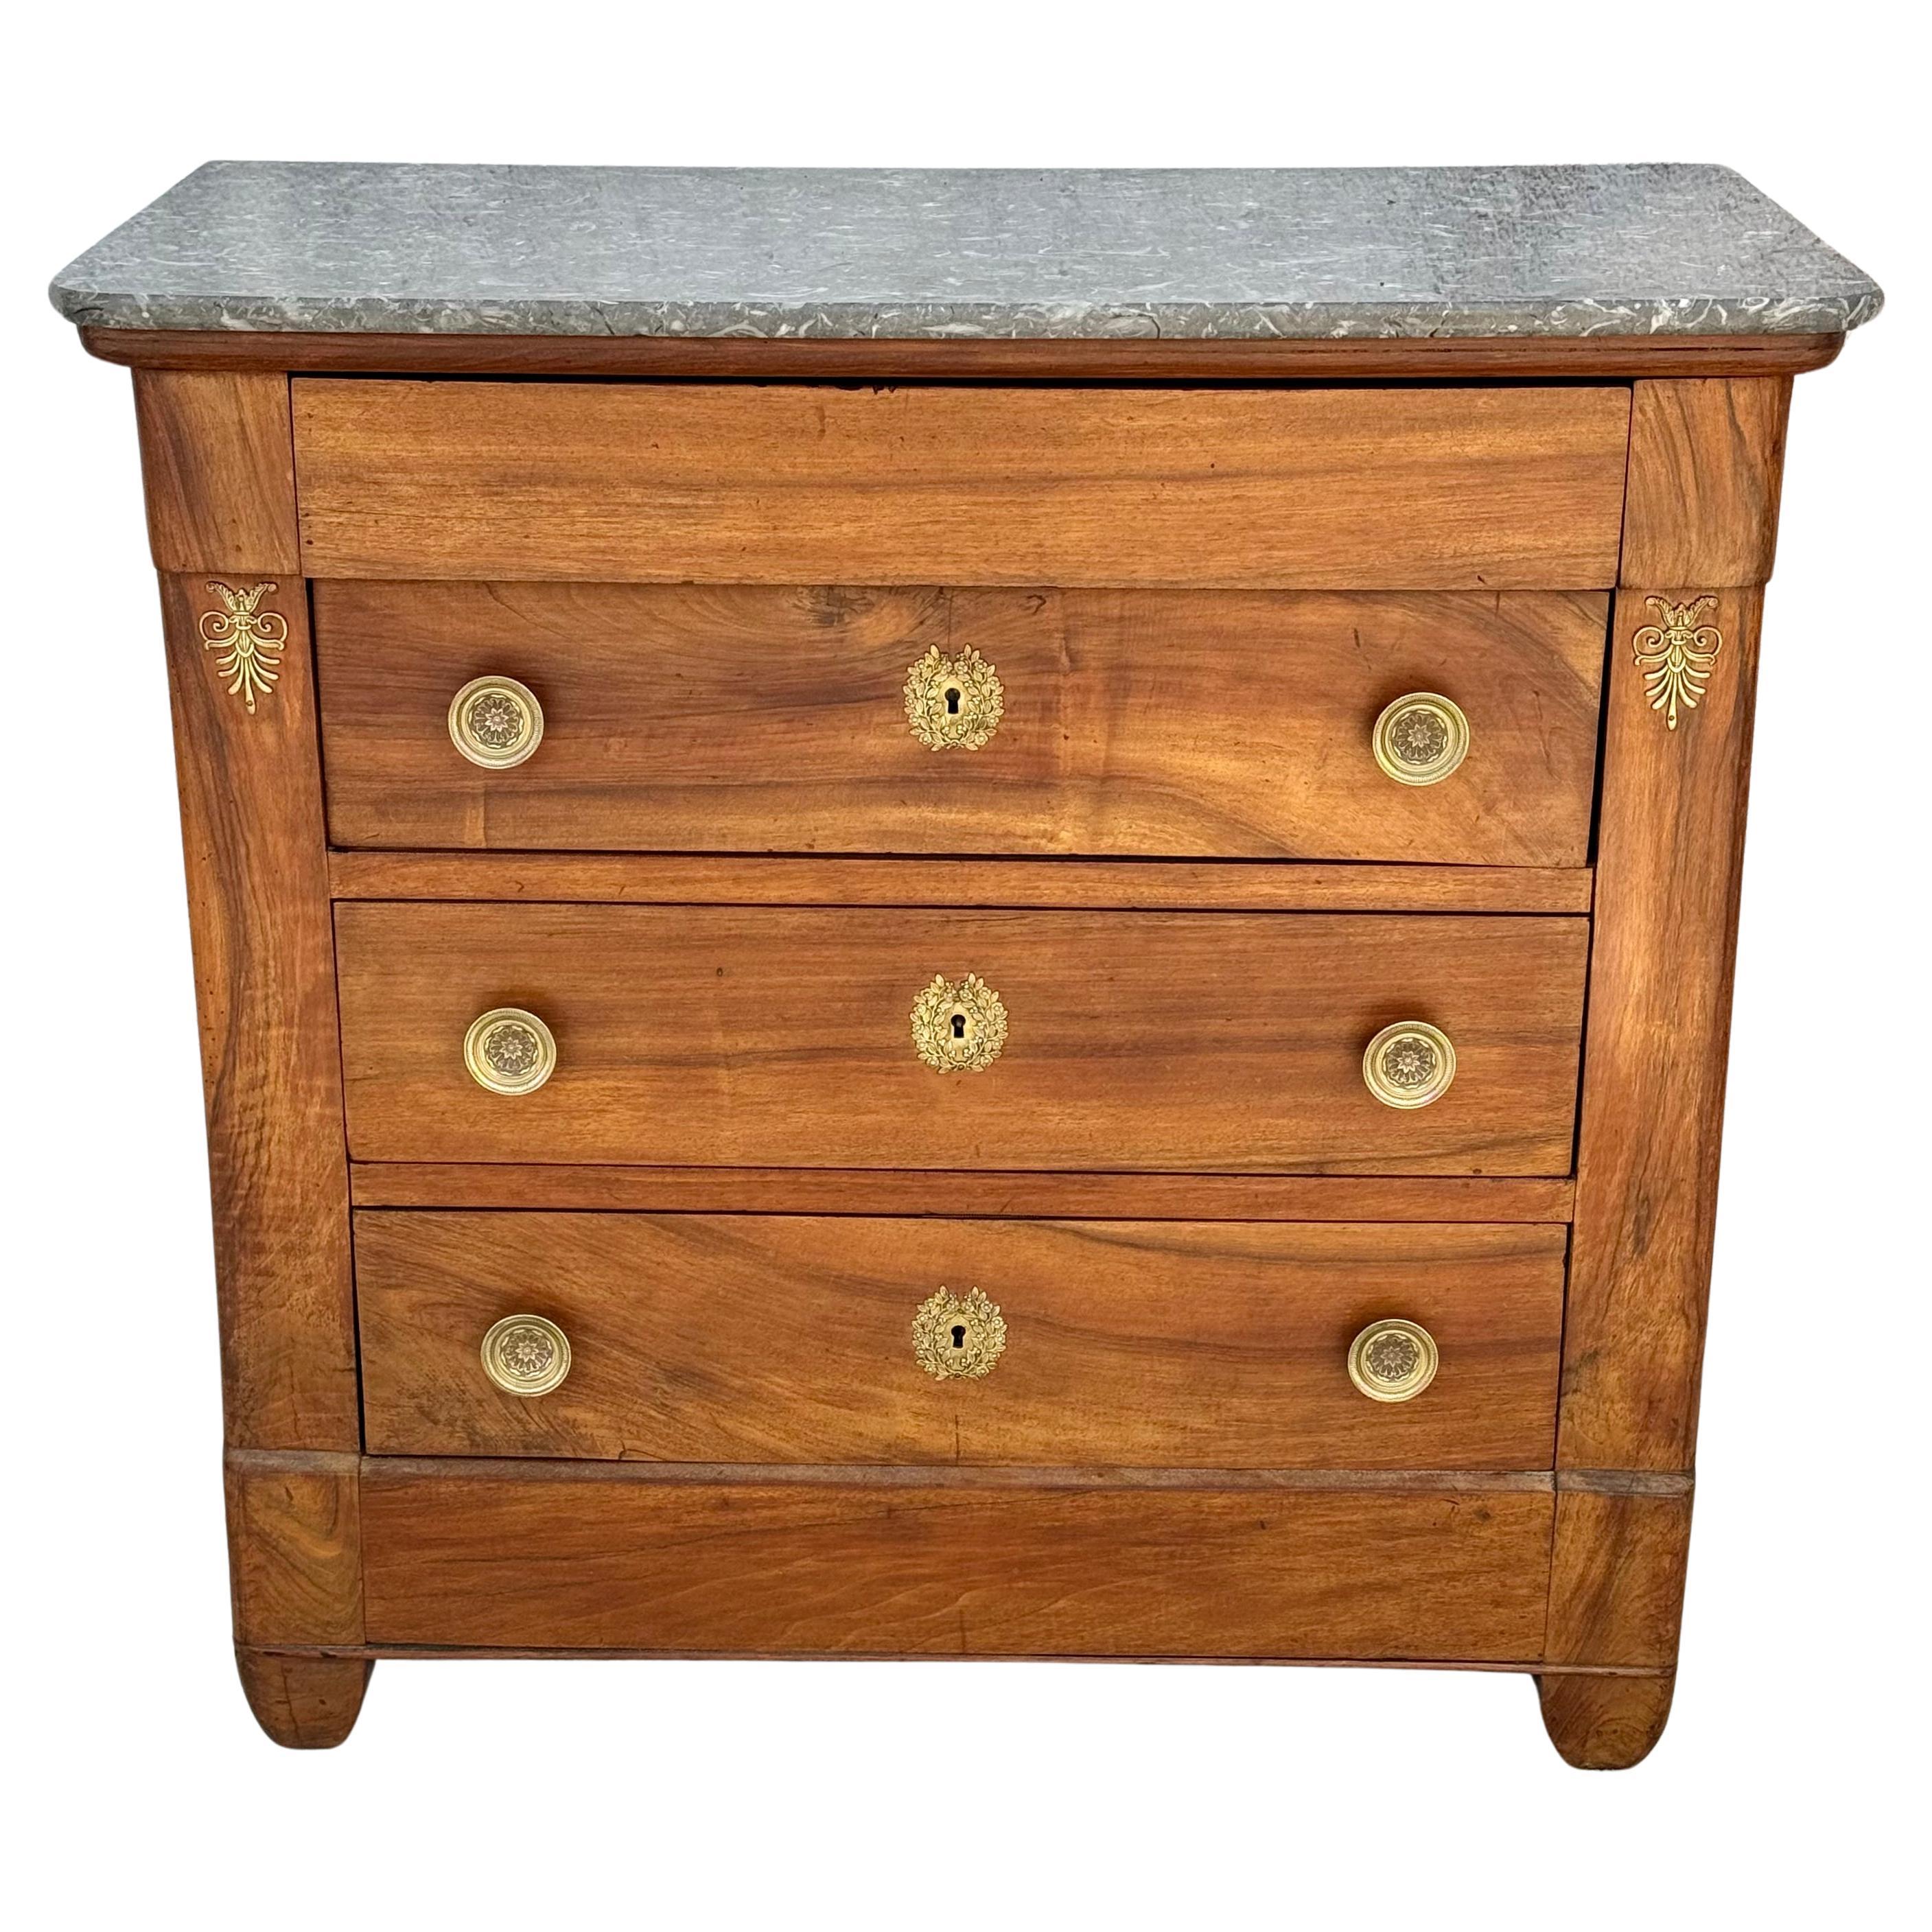 French Empire Ormolu Mounted Marble Top Walnut Commode